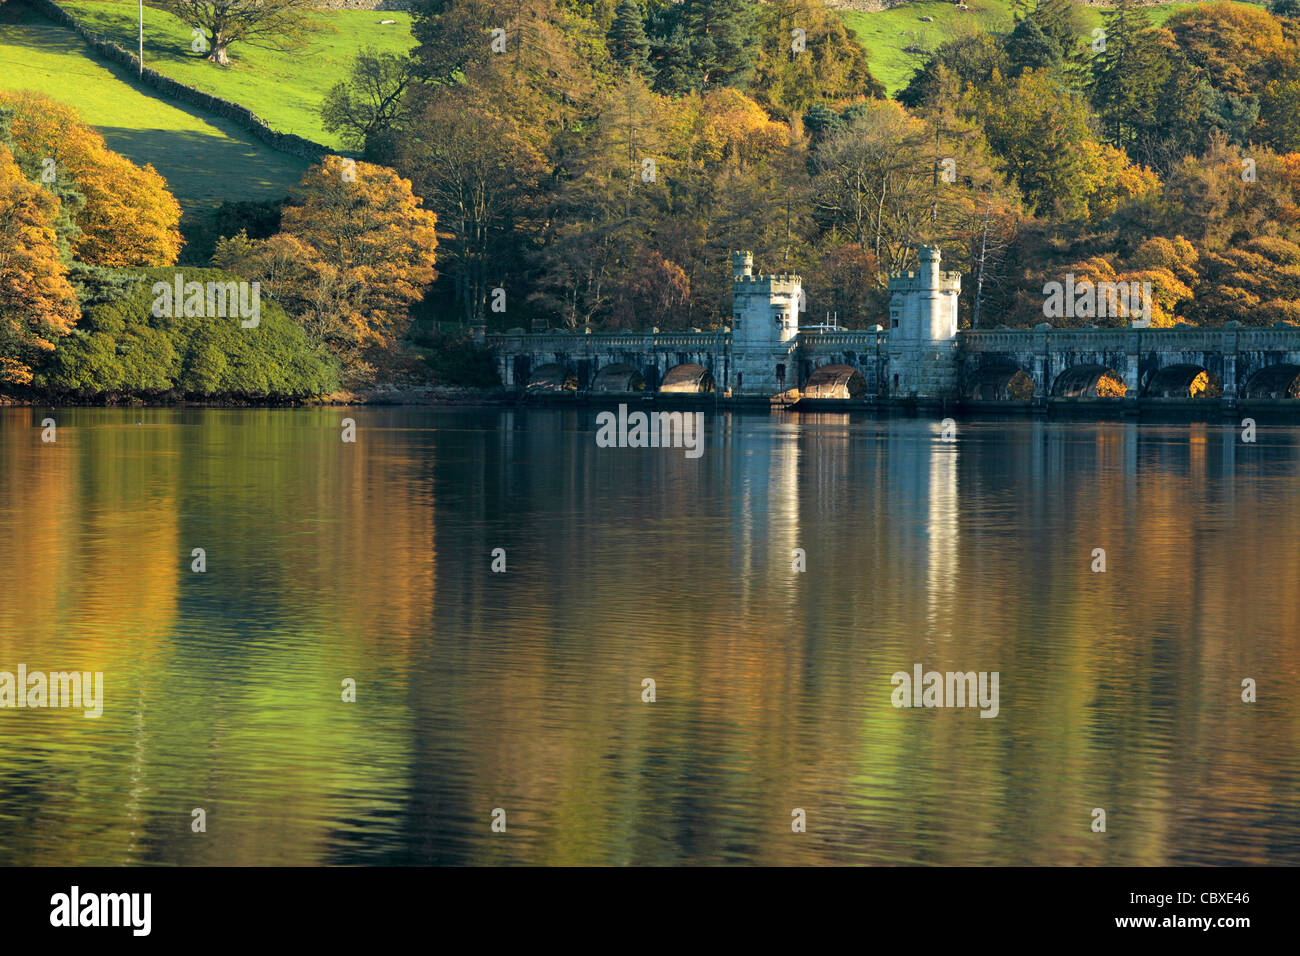 Autumn color reflected in Gouthwaite Reservoir near Ramsgill and Pateley Bridge in Nidderdale, Yorkshire, England Stock Photo